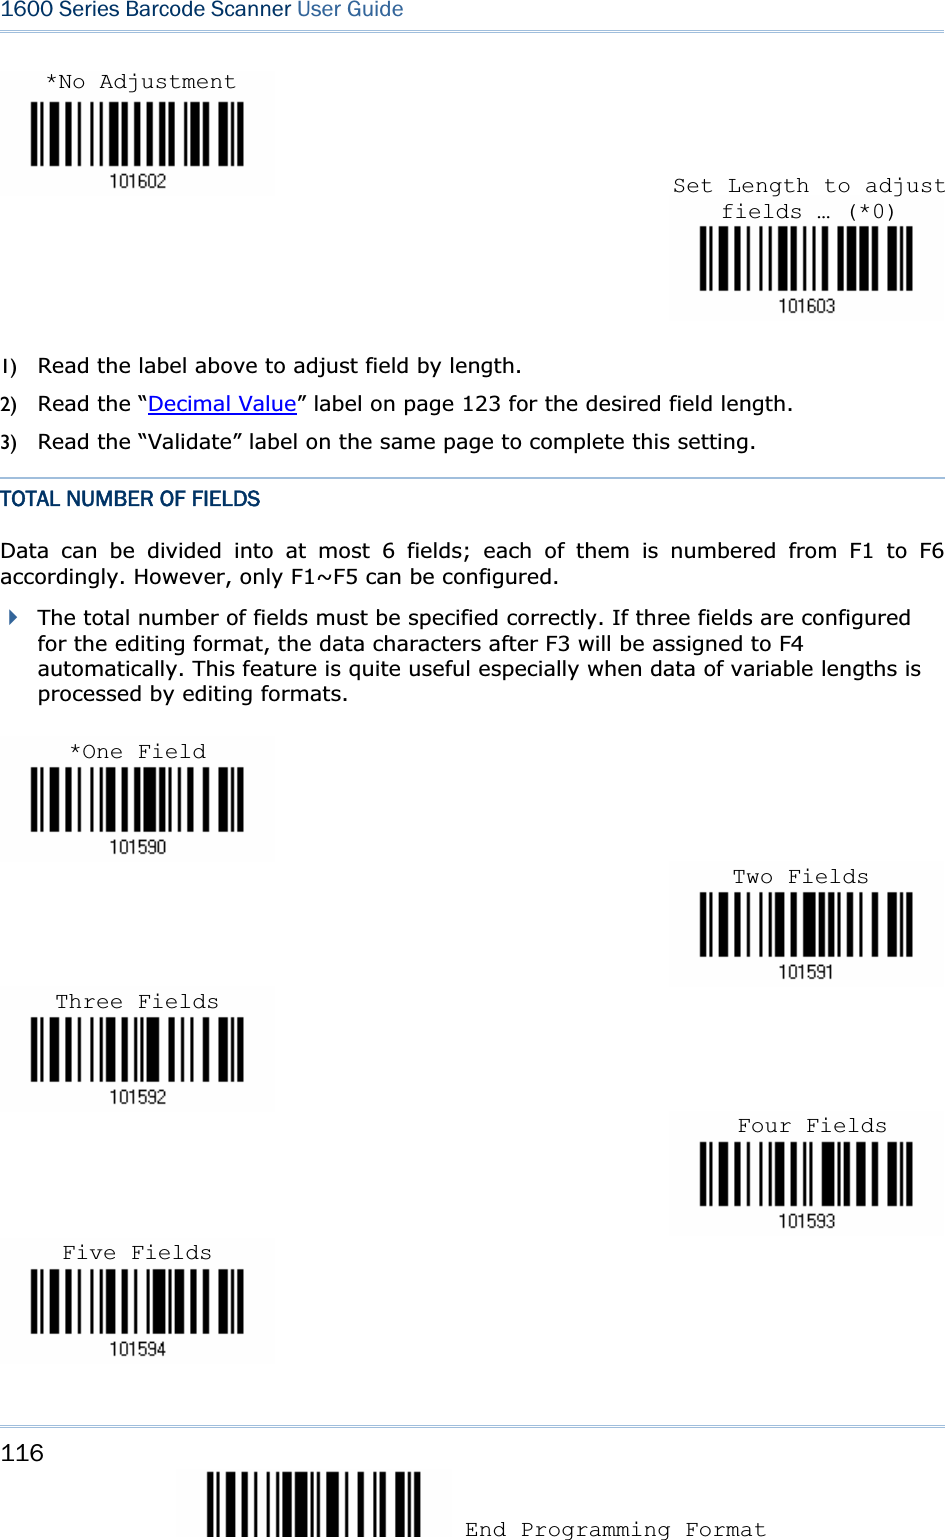 116 End Programming Format 1600 Series Barcode Scanner User Guide1) Read the label above to adjust field by length.   2) Read the “Decimal Value” label on page 123 for the desired field length. 3) Read the “Validate” label on the same page to complete this setting. TOTAL NUMBER OF FIELDS Data can be divided into at most 6 fields; each of them is numbered from F1 to F6 accordingly. However, only F1~F5 can be configured.   The total number of fields must be specified correctly. If three fields are configured for the editing format, the data characters after F3 will be assigned to F4 automatically. This feature is quite useful especially when data of variable lengths is processed by editing formats. Set Length to adjust fields … (*0)*No Adjustment *One Field Two Fields Three FieldsFour FieldsFive Fields 